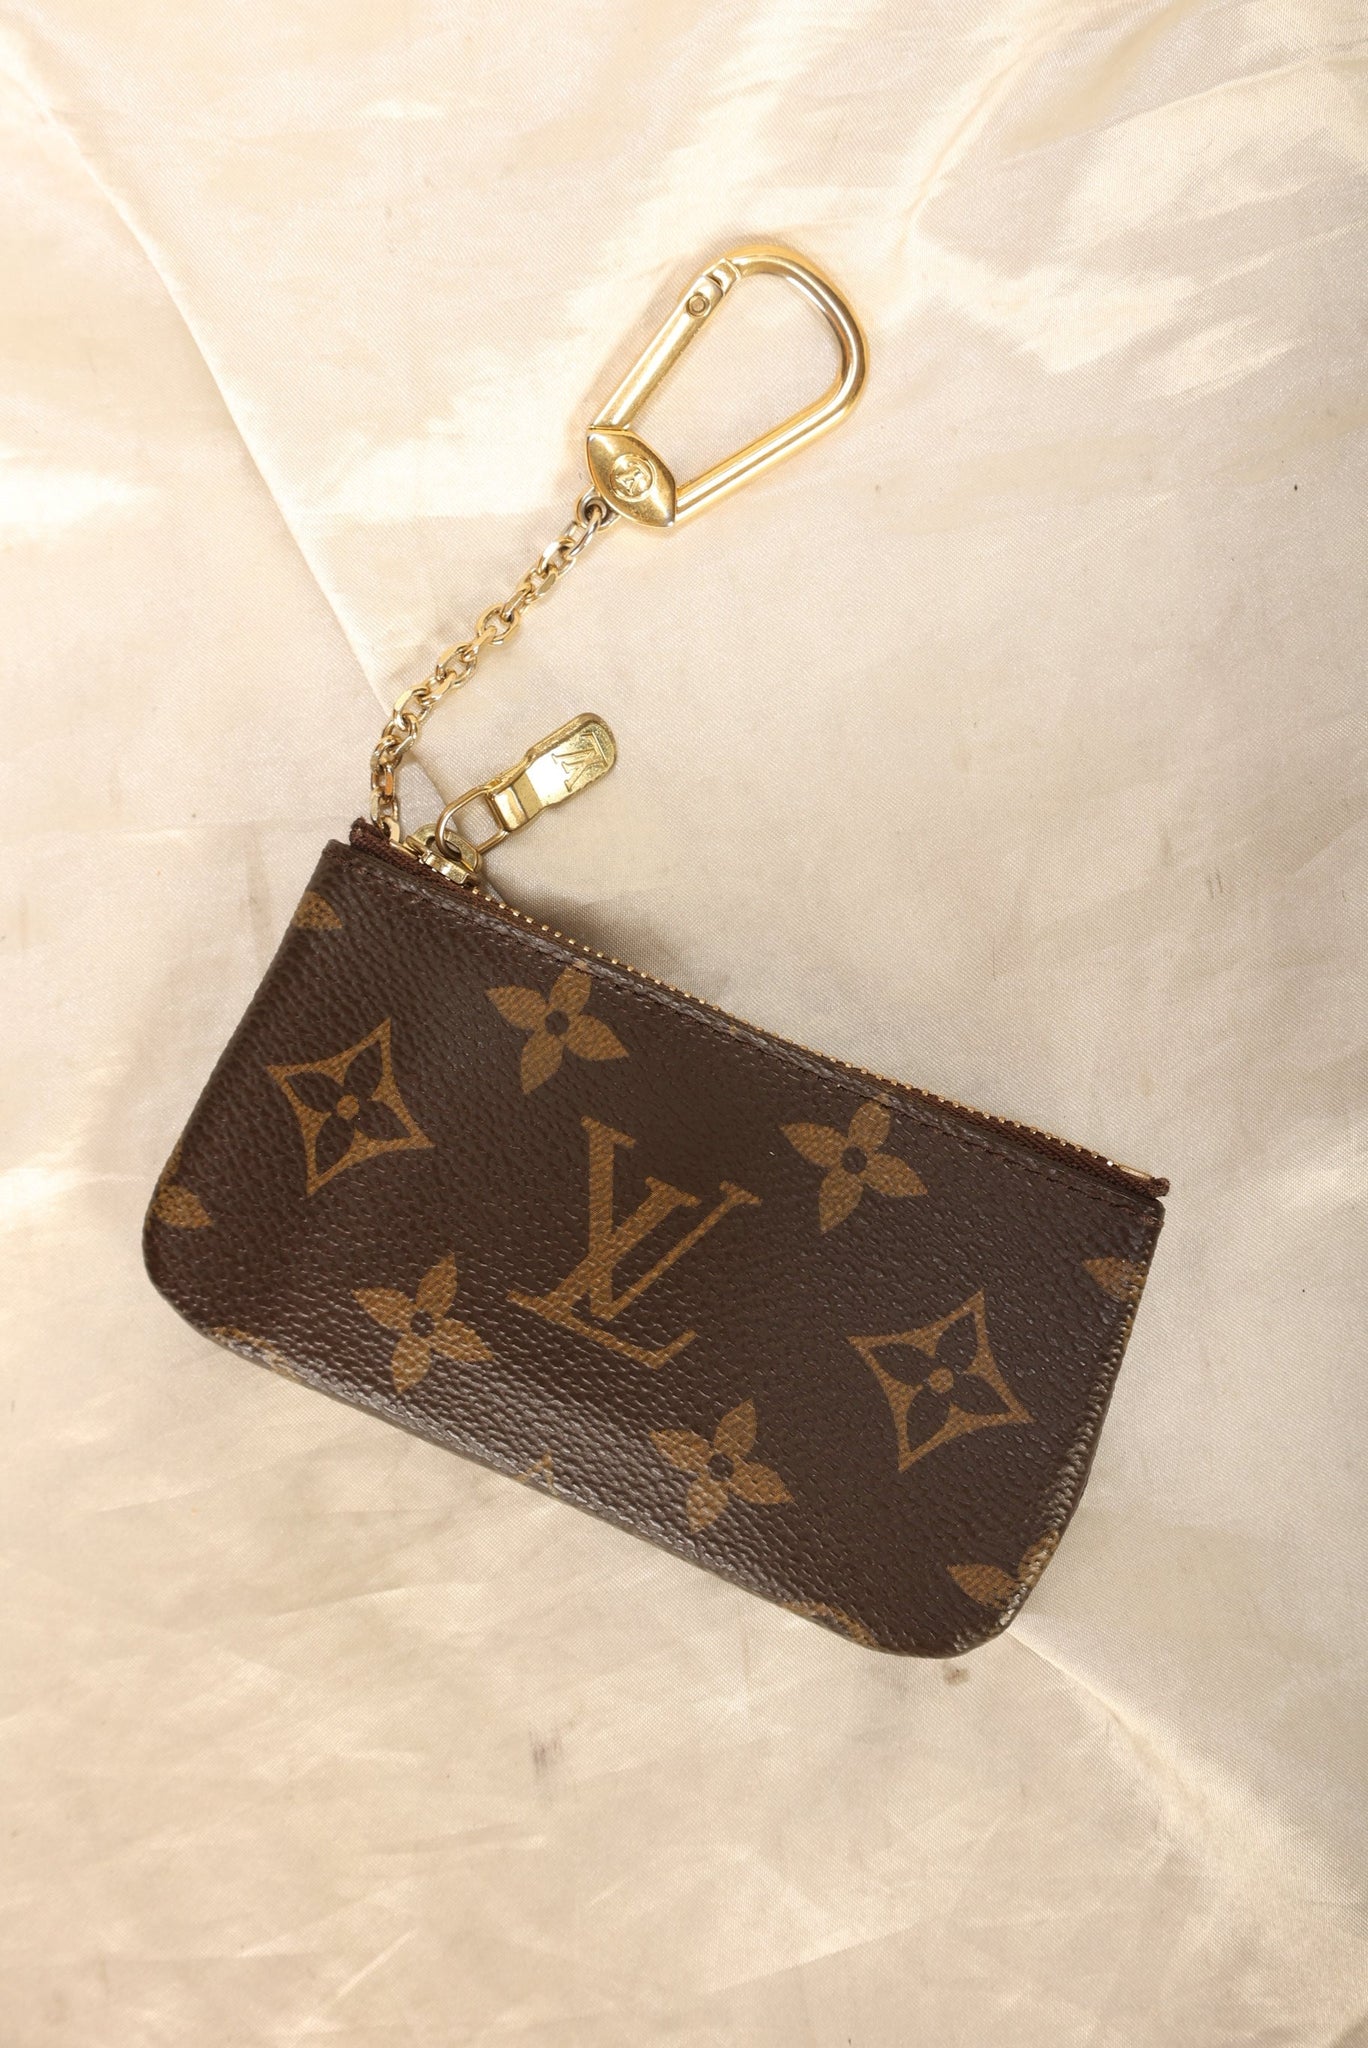 REVIEW OF THE LOUIS VUITTON KEY CLES (KEY POUCH), 7 WAYS TO USE